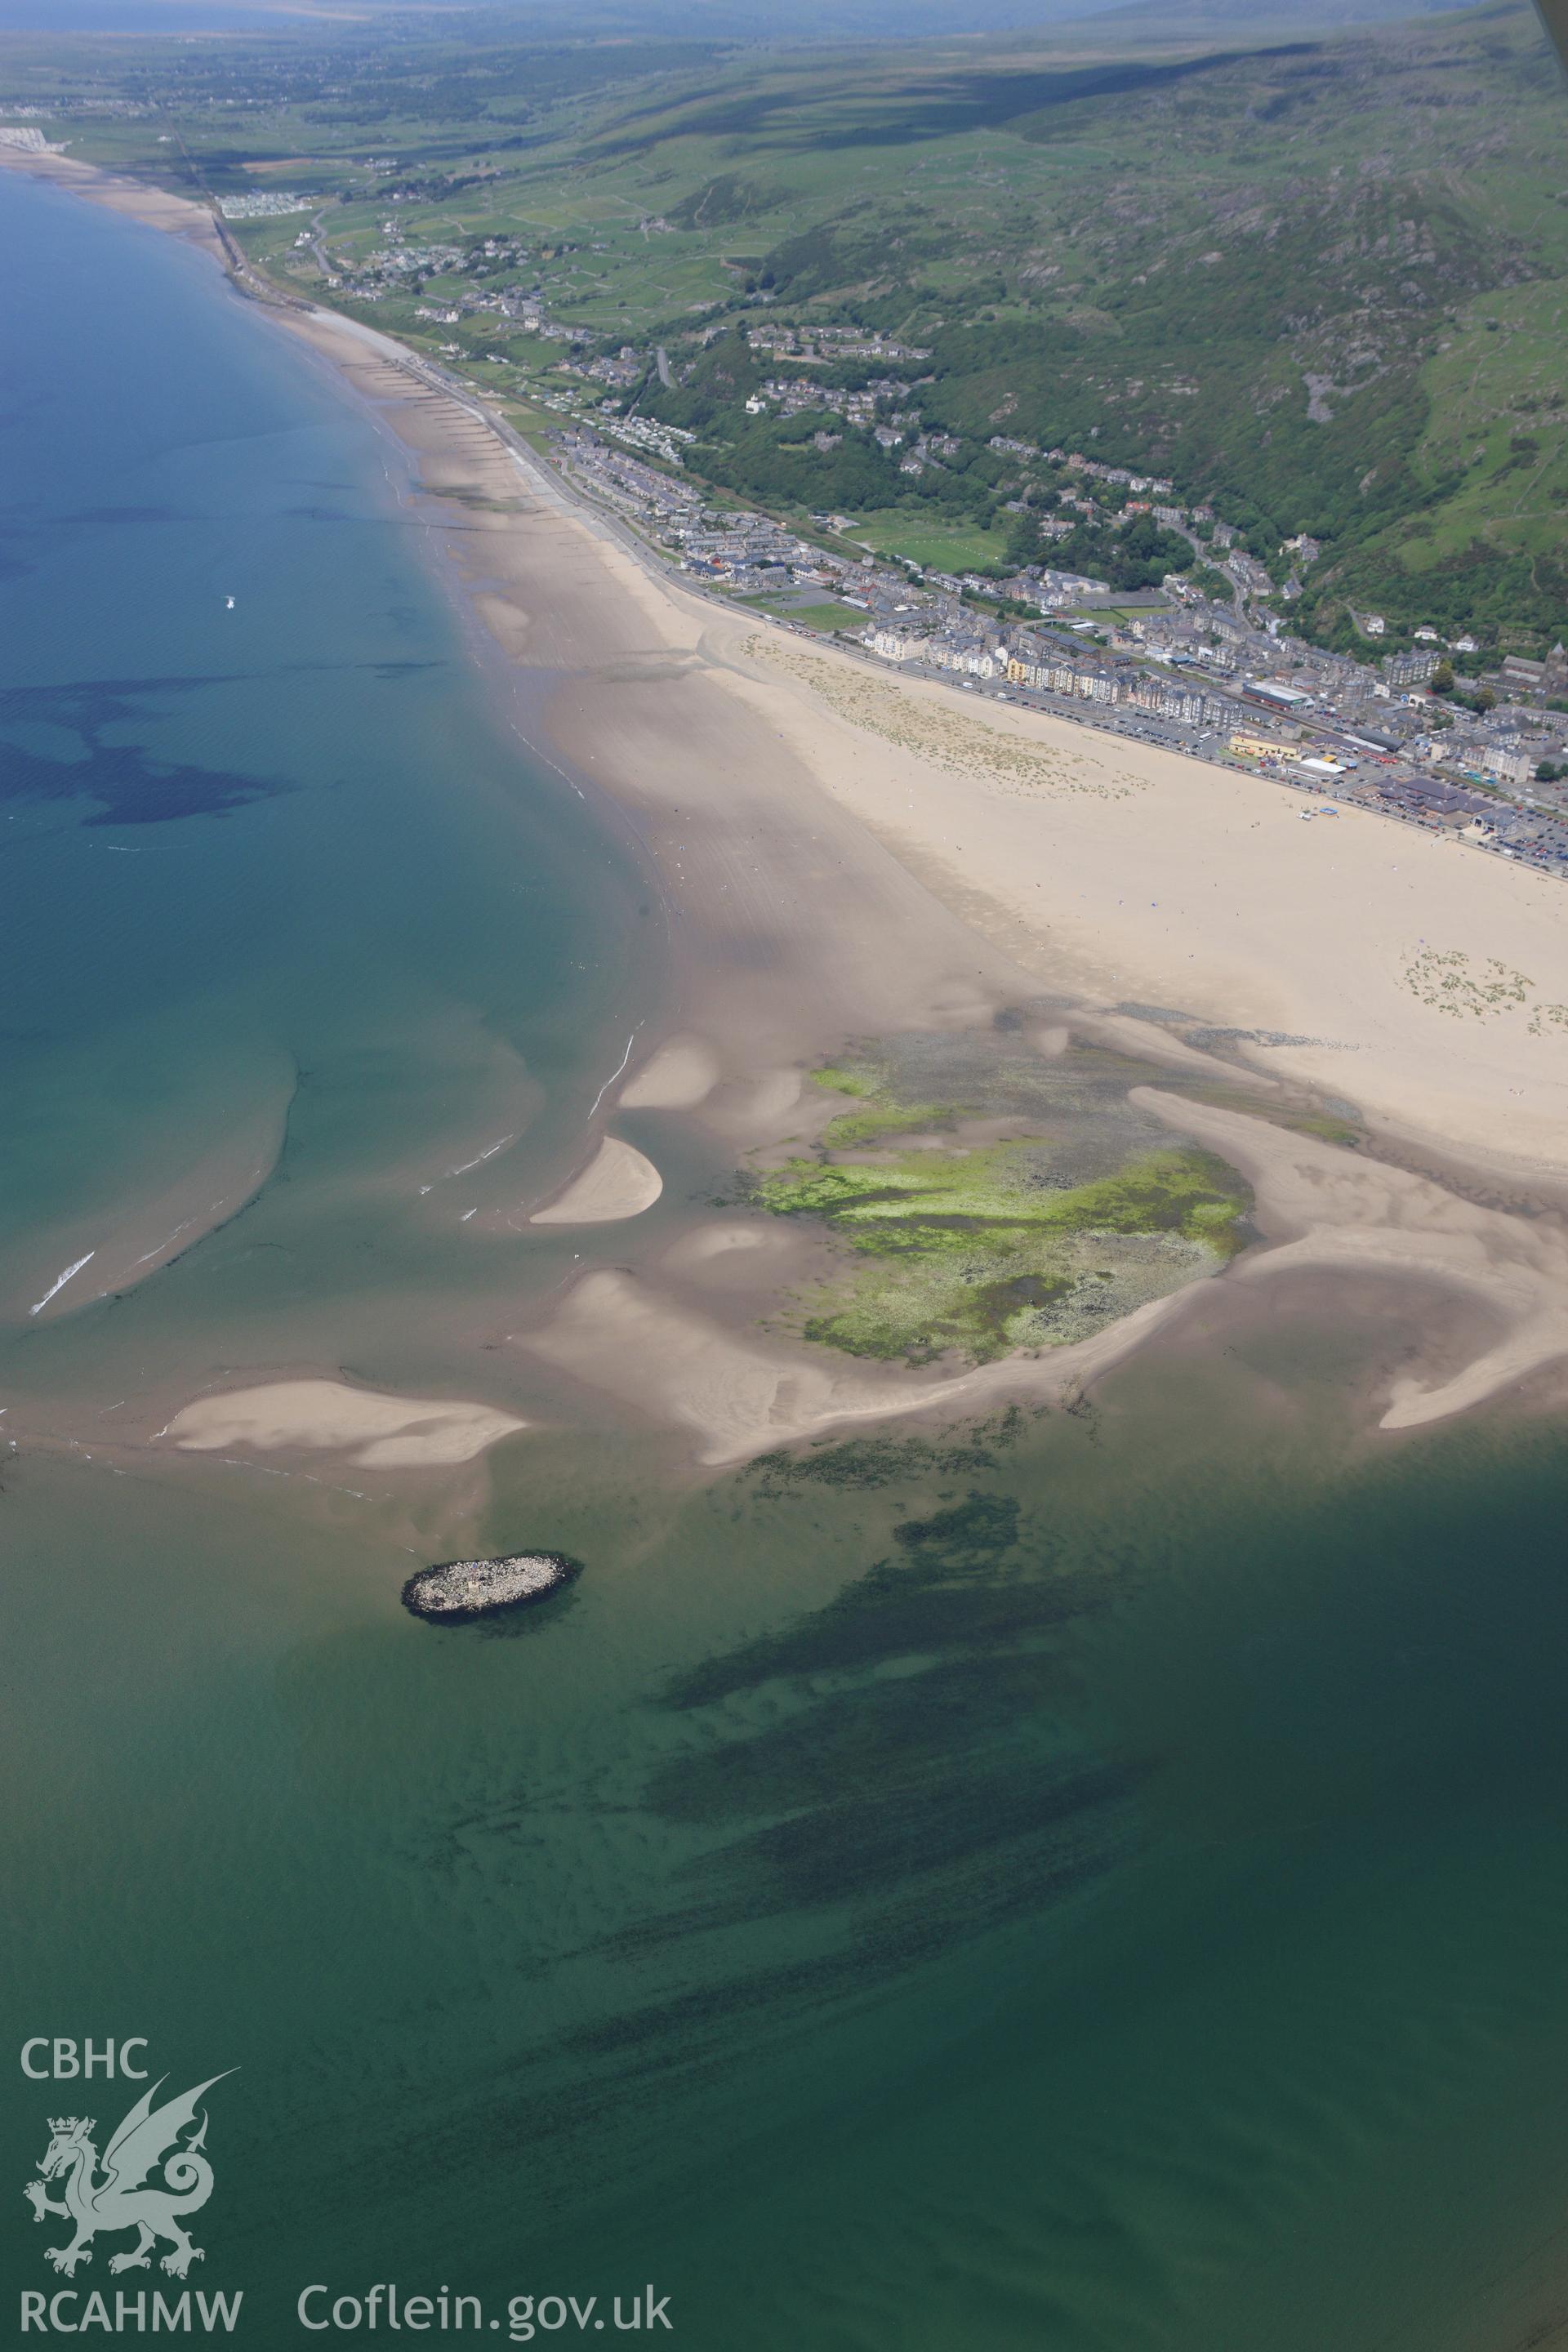 RCAHMW colour oblique aerial photograph of Barmouth and surrounding landscape. Taken on 02 June 2009 by Toby Driver